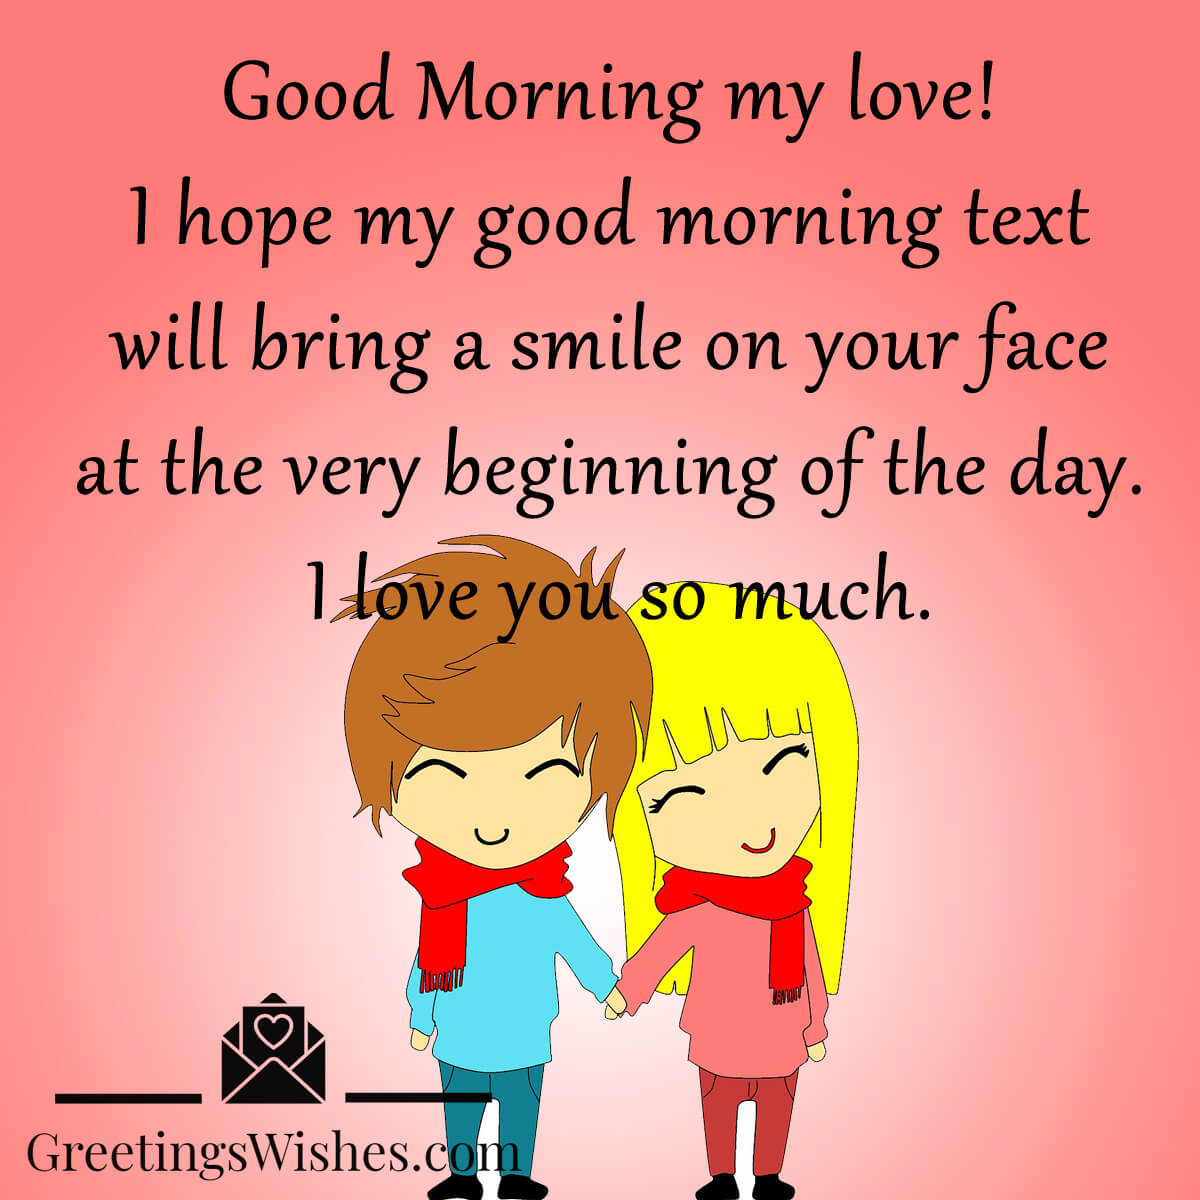 Romantic Good Morning Wishes - Greetings Wishes